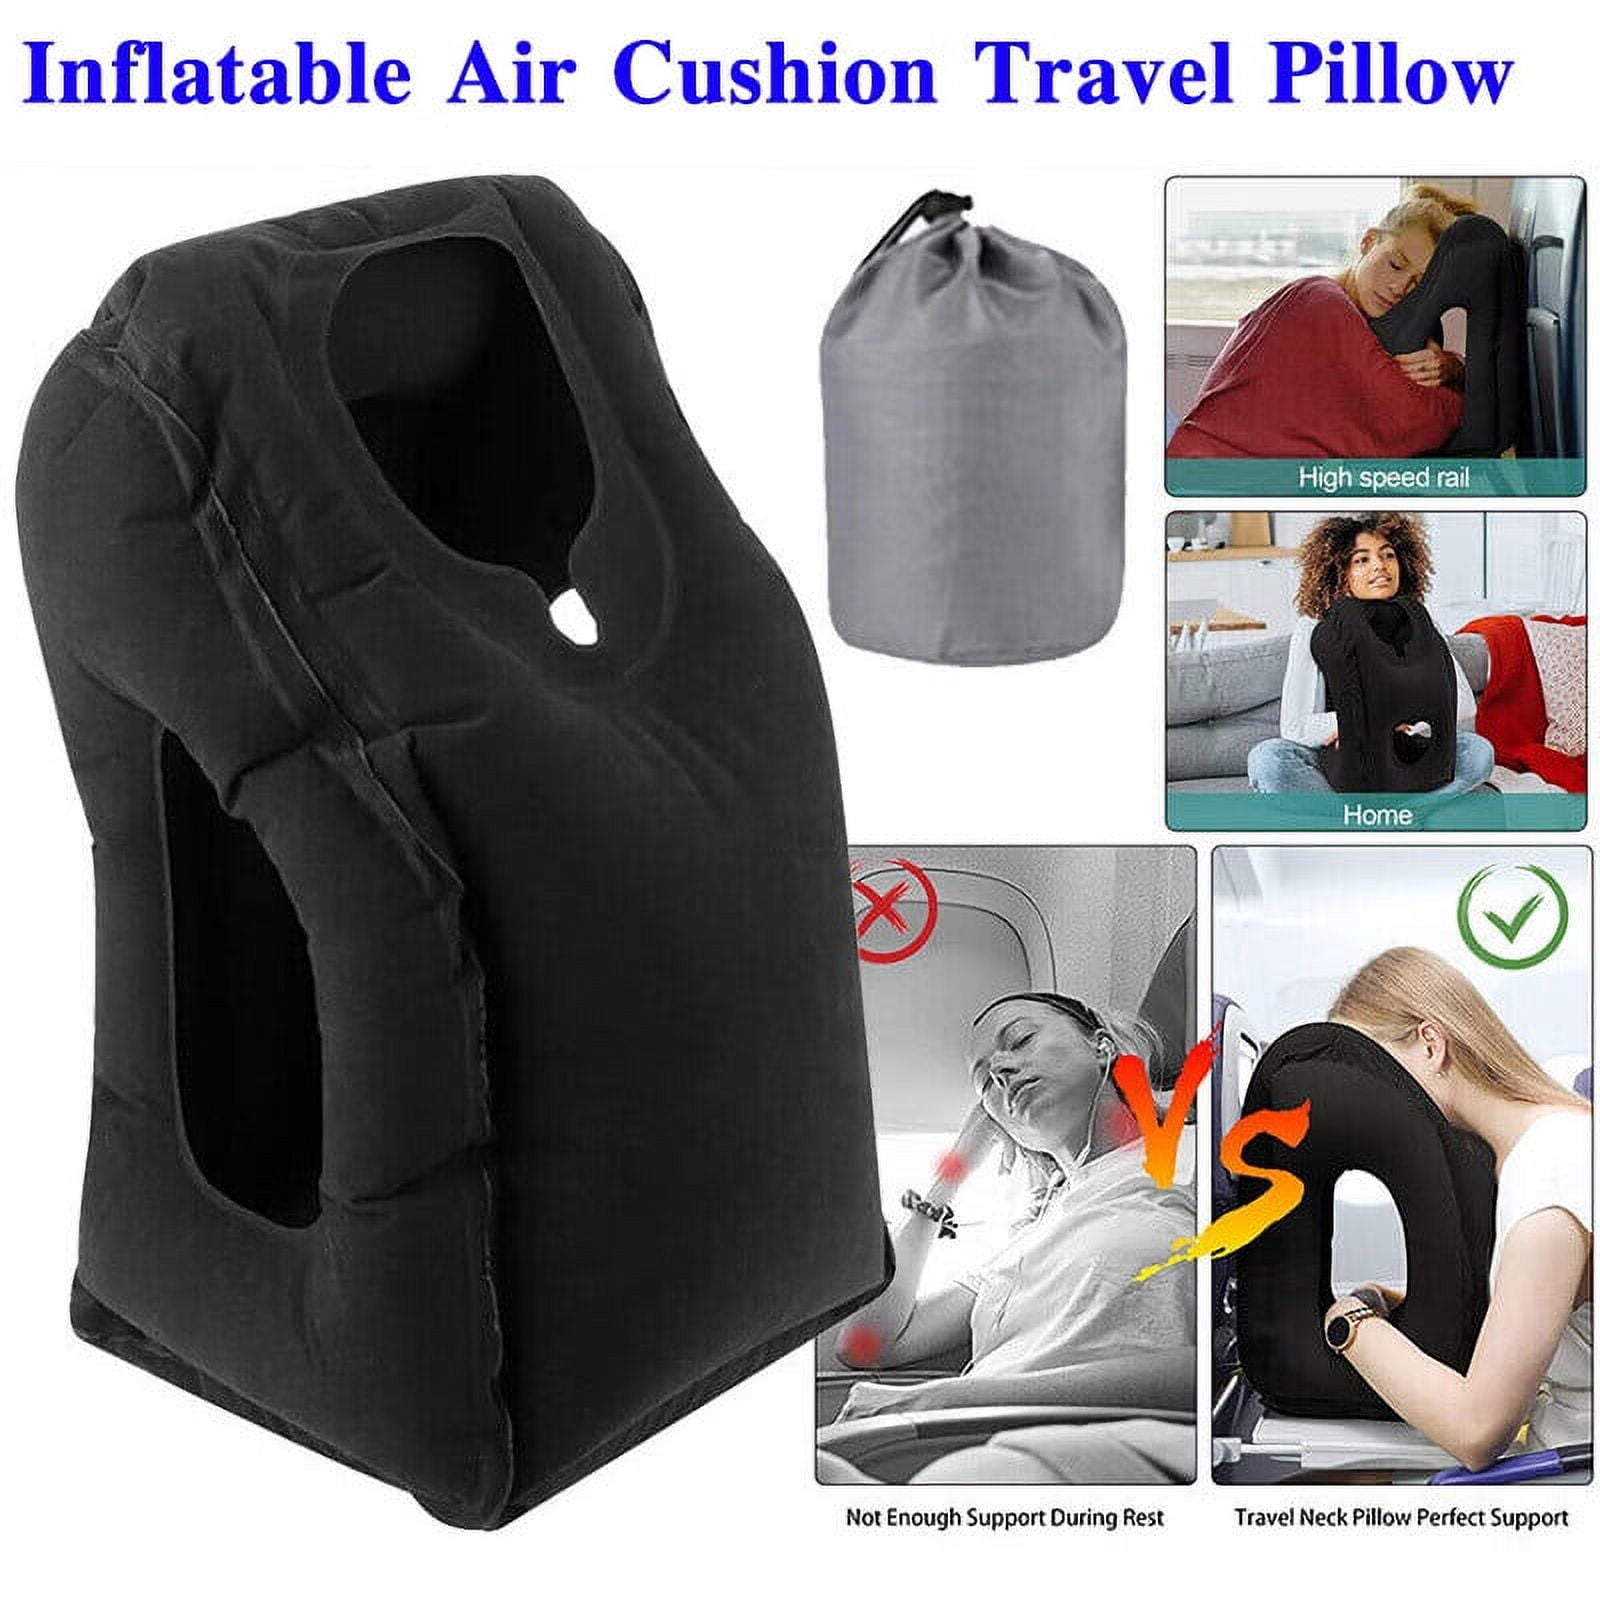 Upgraded Inflatable Air Cushion Travel Pillow Headrest Chin Support  Cushions for Airplane Plane Car Office Rest Neck Nap Pillows